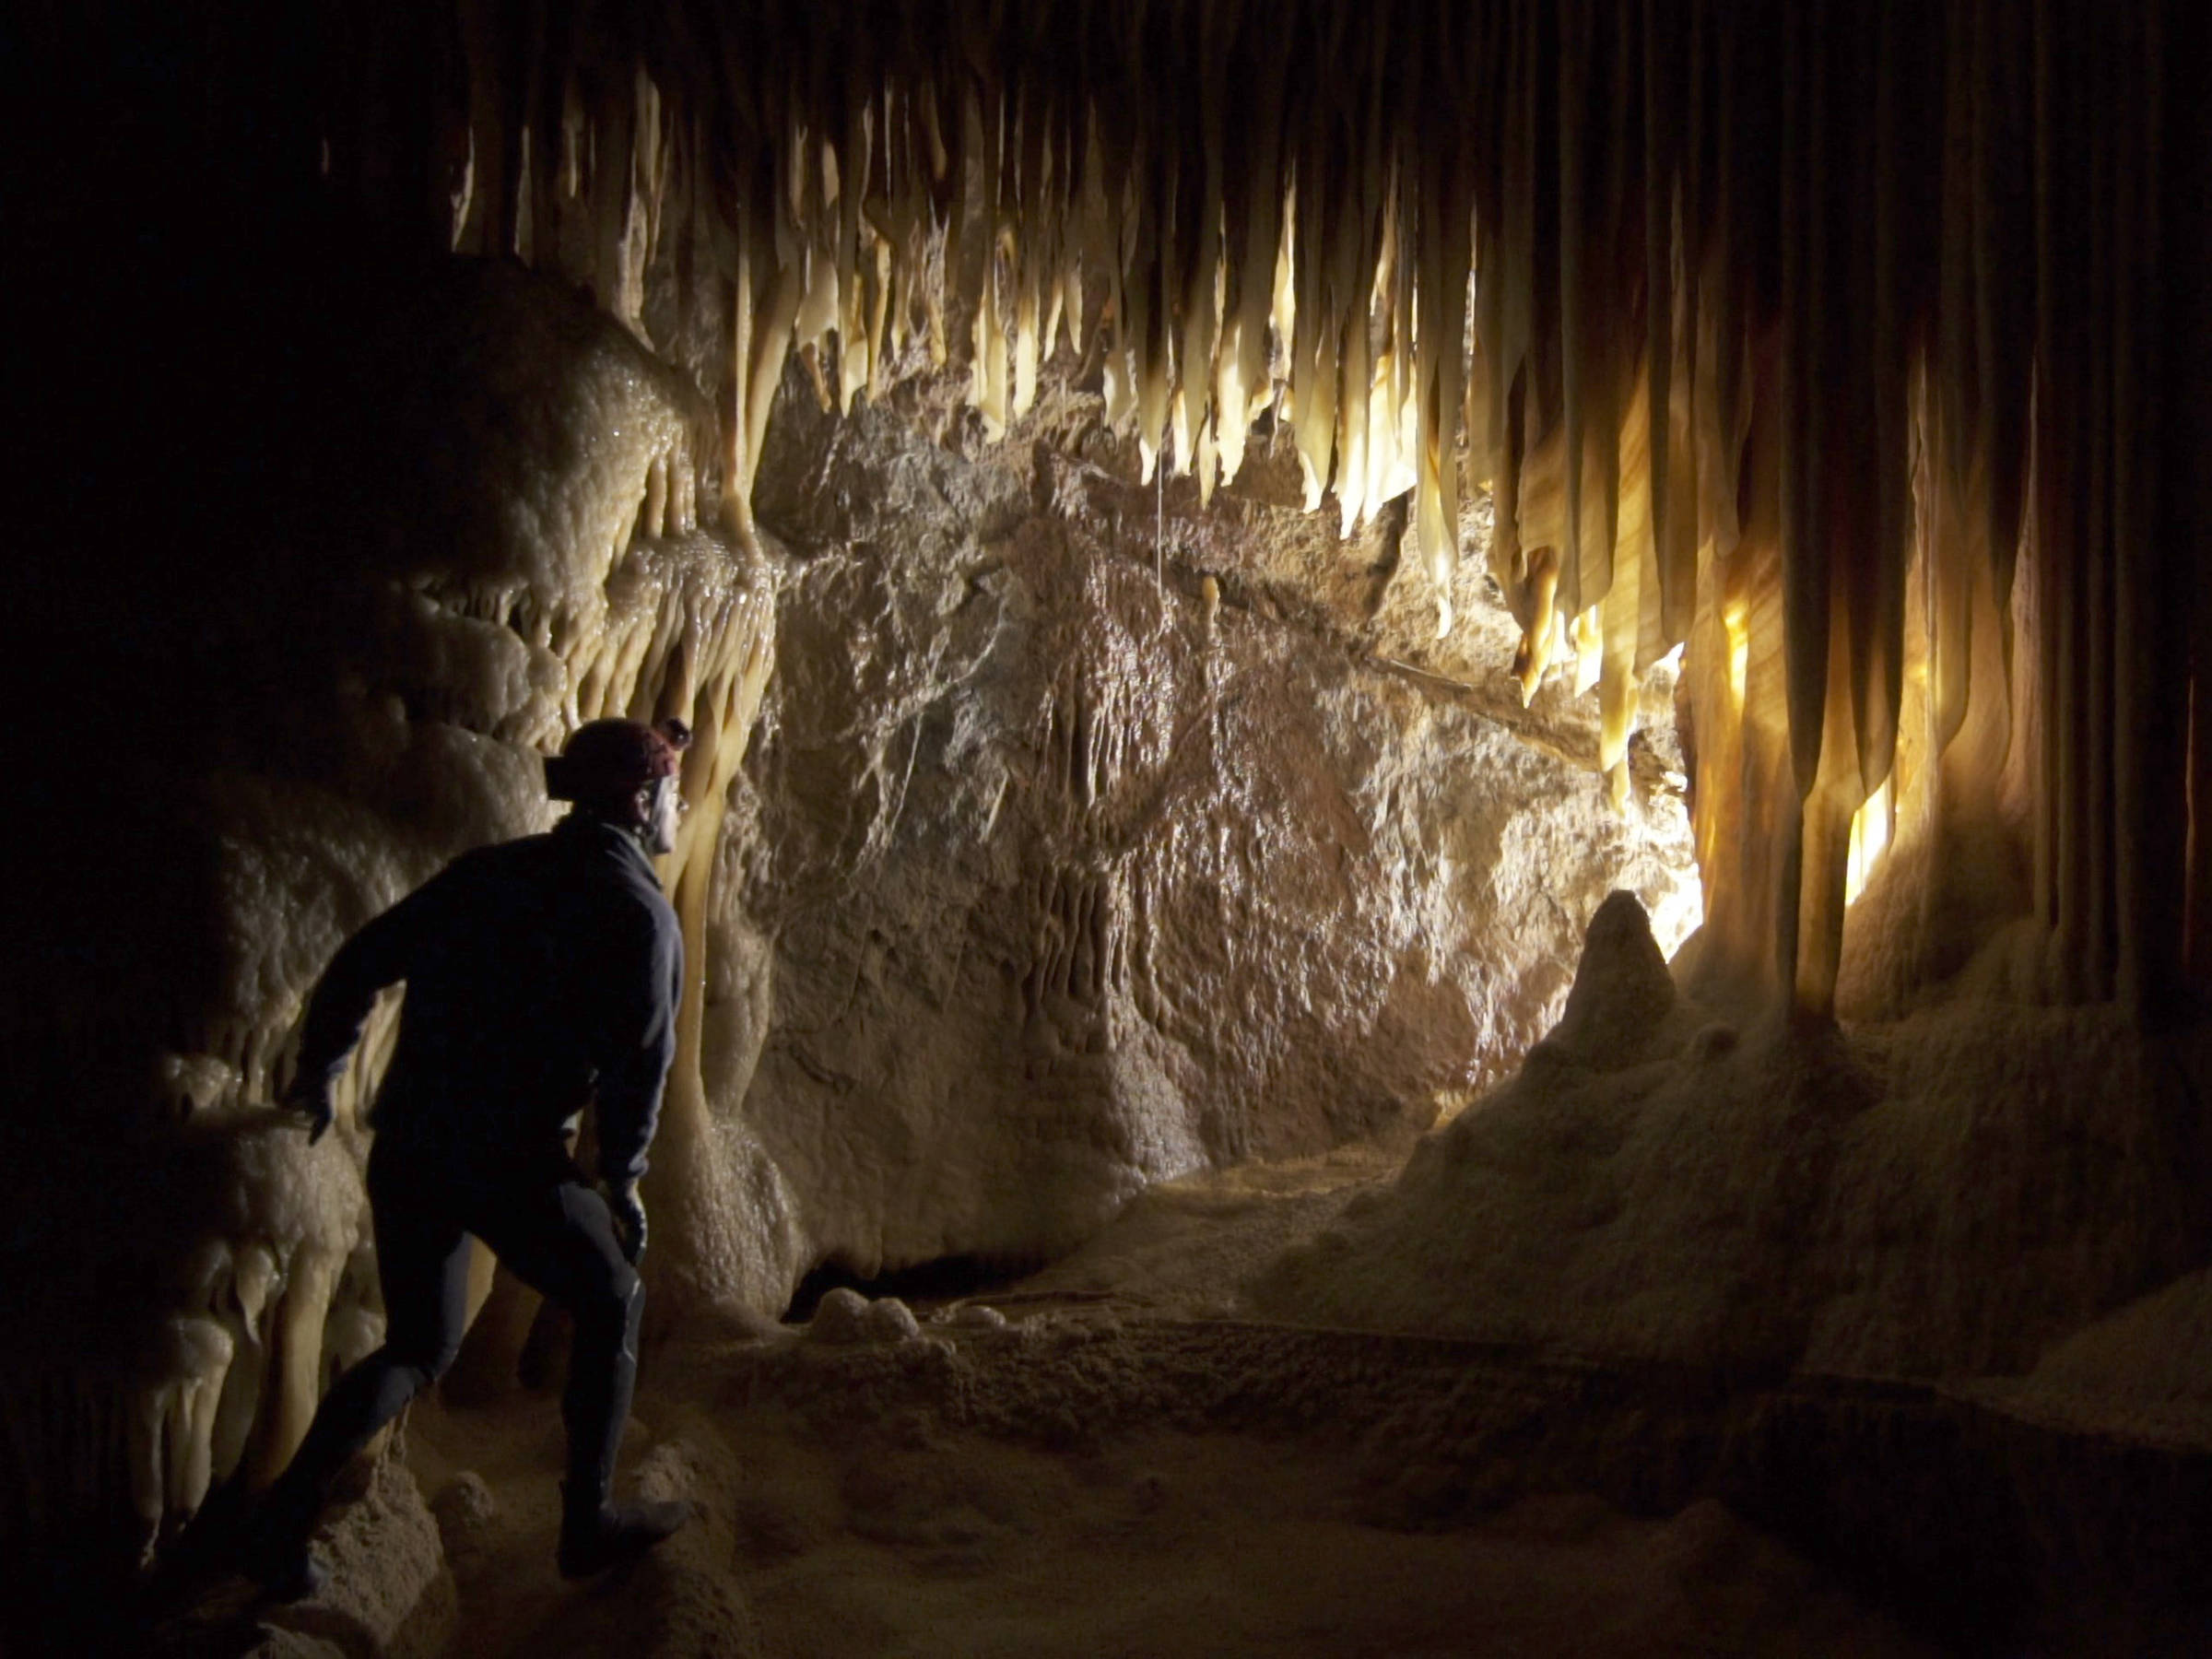 The mouth to a Tasmanian cave. The photo is taken from within the cave looking back toward the opening. The opening cannot be seen but there is daylight shining in highlighting the many stalactites hanging from the ceiling. The stalactites are glowing like crystals, To the left of the frame is Bookend Trust Cinematographer and editor, Justin Smith. Justin stands only two-thirds the thigh of the cave. He is mostly silhouette. Photo: Joe Shemesh.